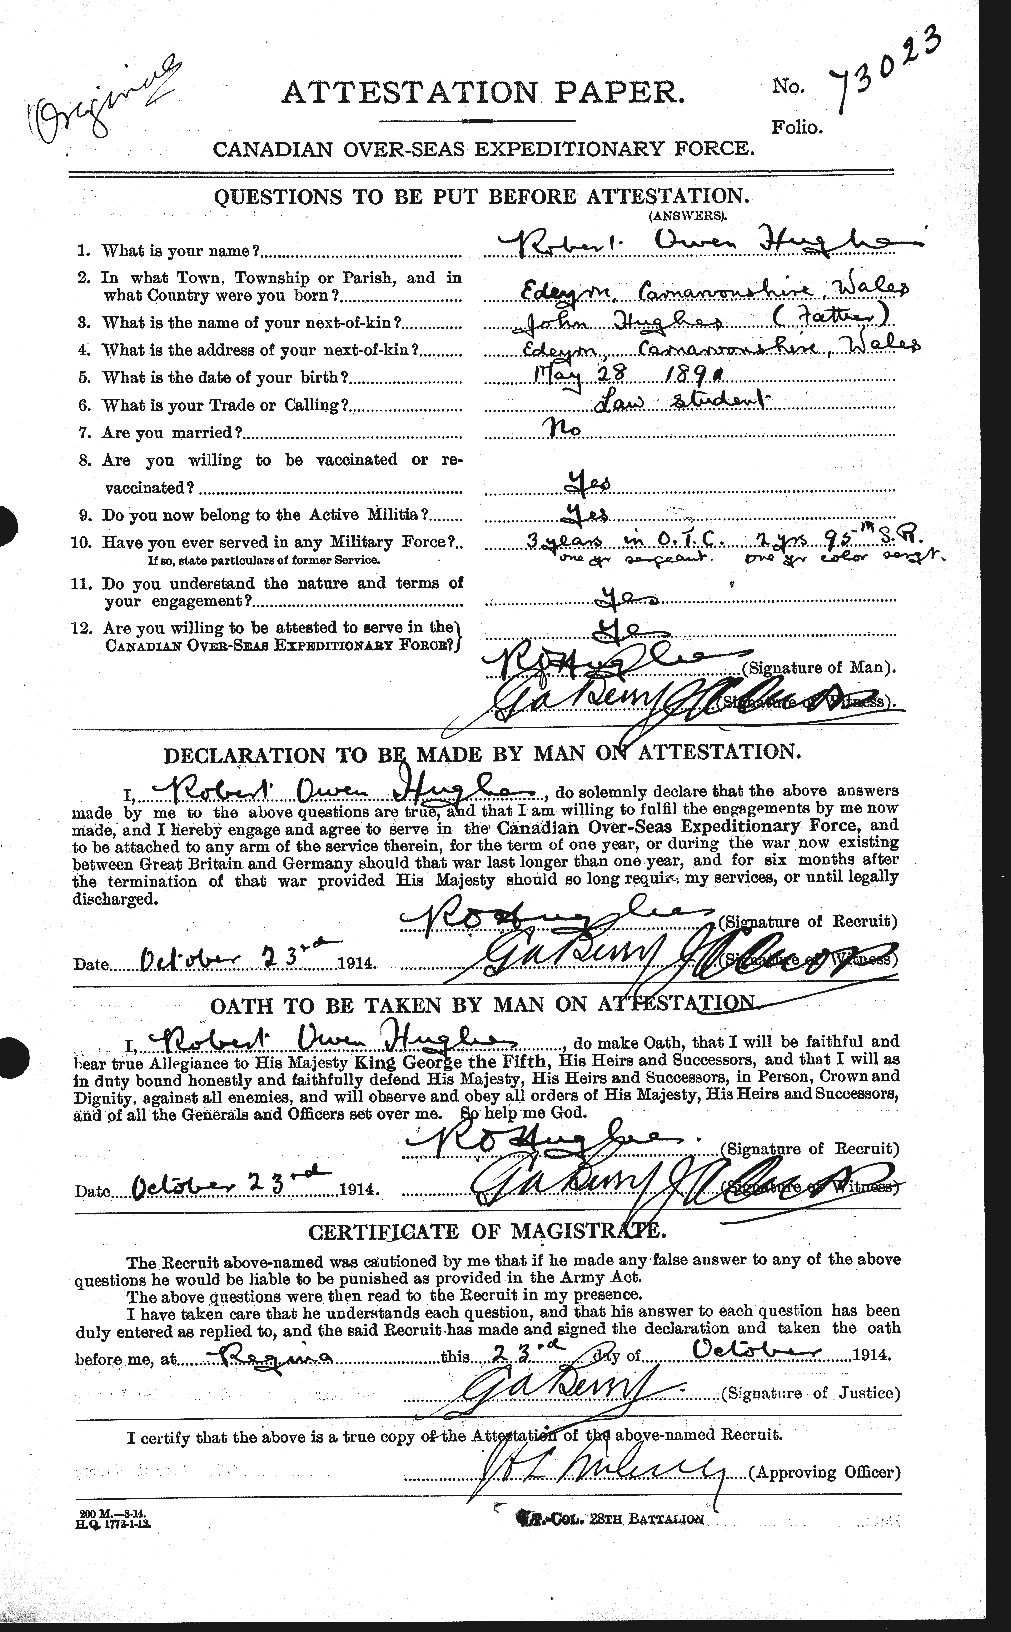 Personnel Records of the First World War - CEF 406620a